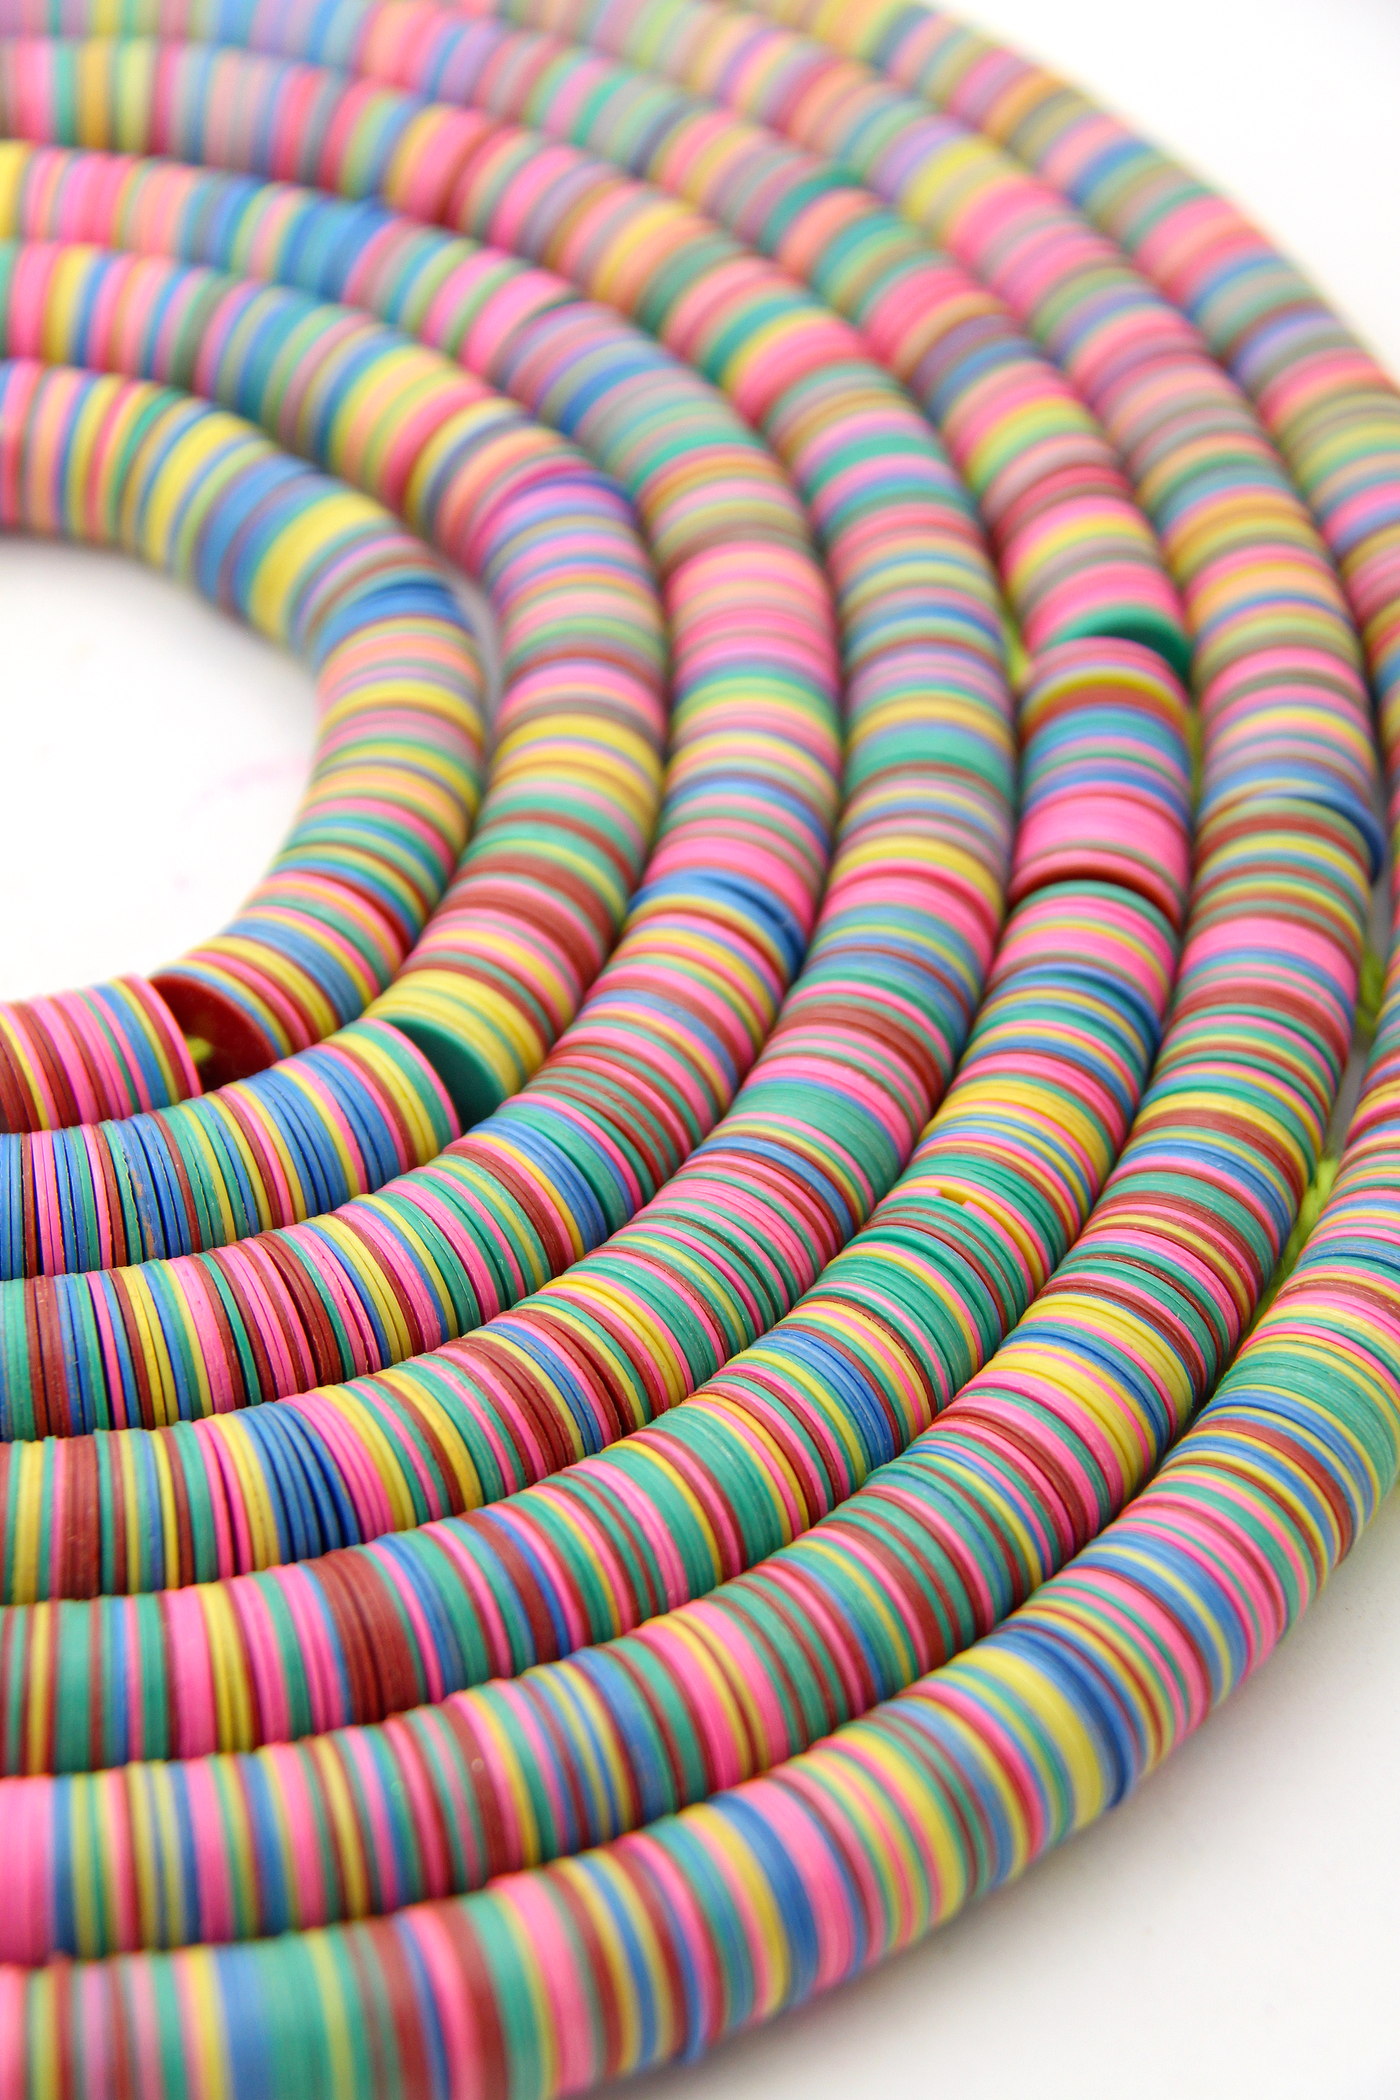 14mm Multi Color African Vinyl Record Beads, Authentic Waist Beads